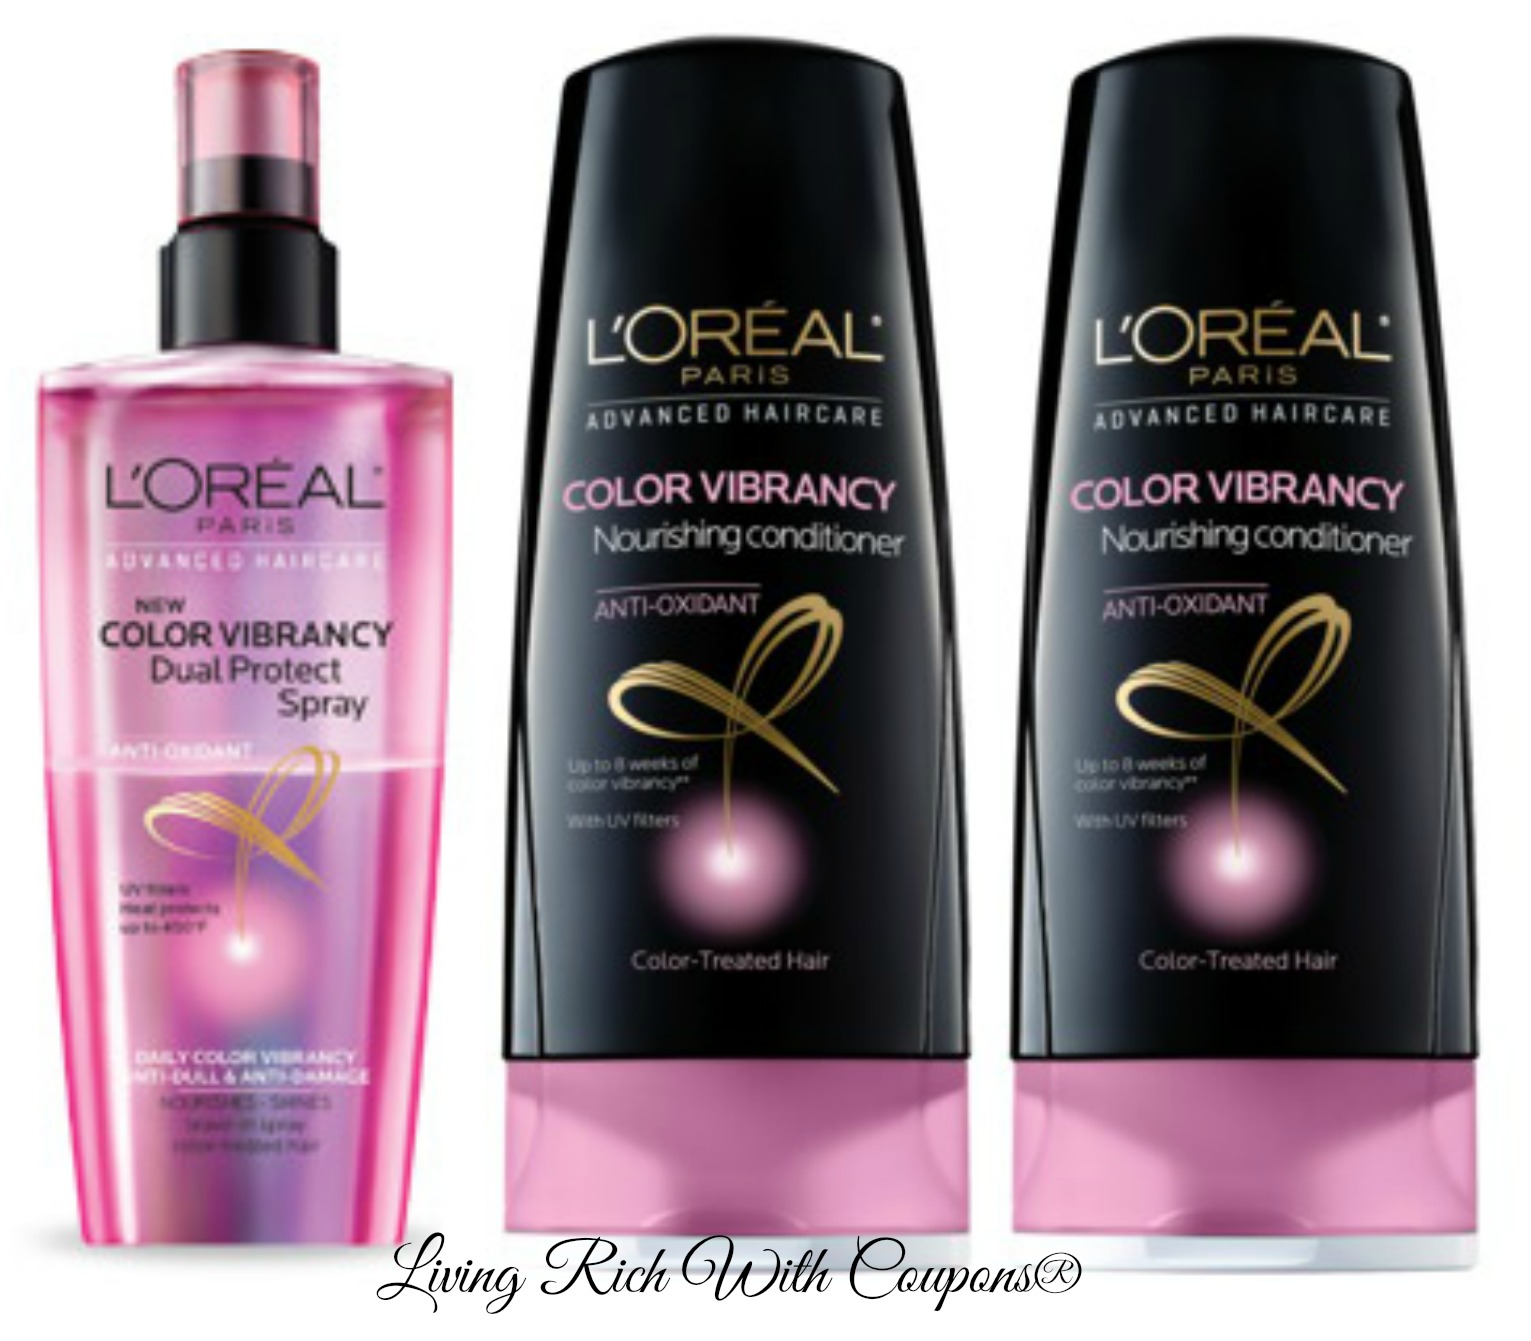 l-oreal-advanced-haircare-only-0-42-at-walgreens-7-7-living-rich